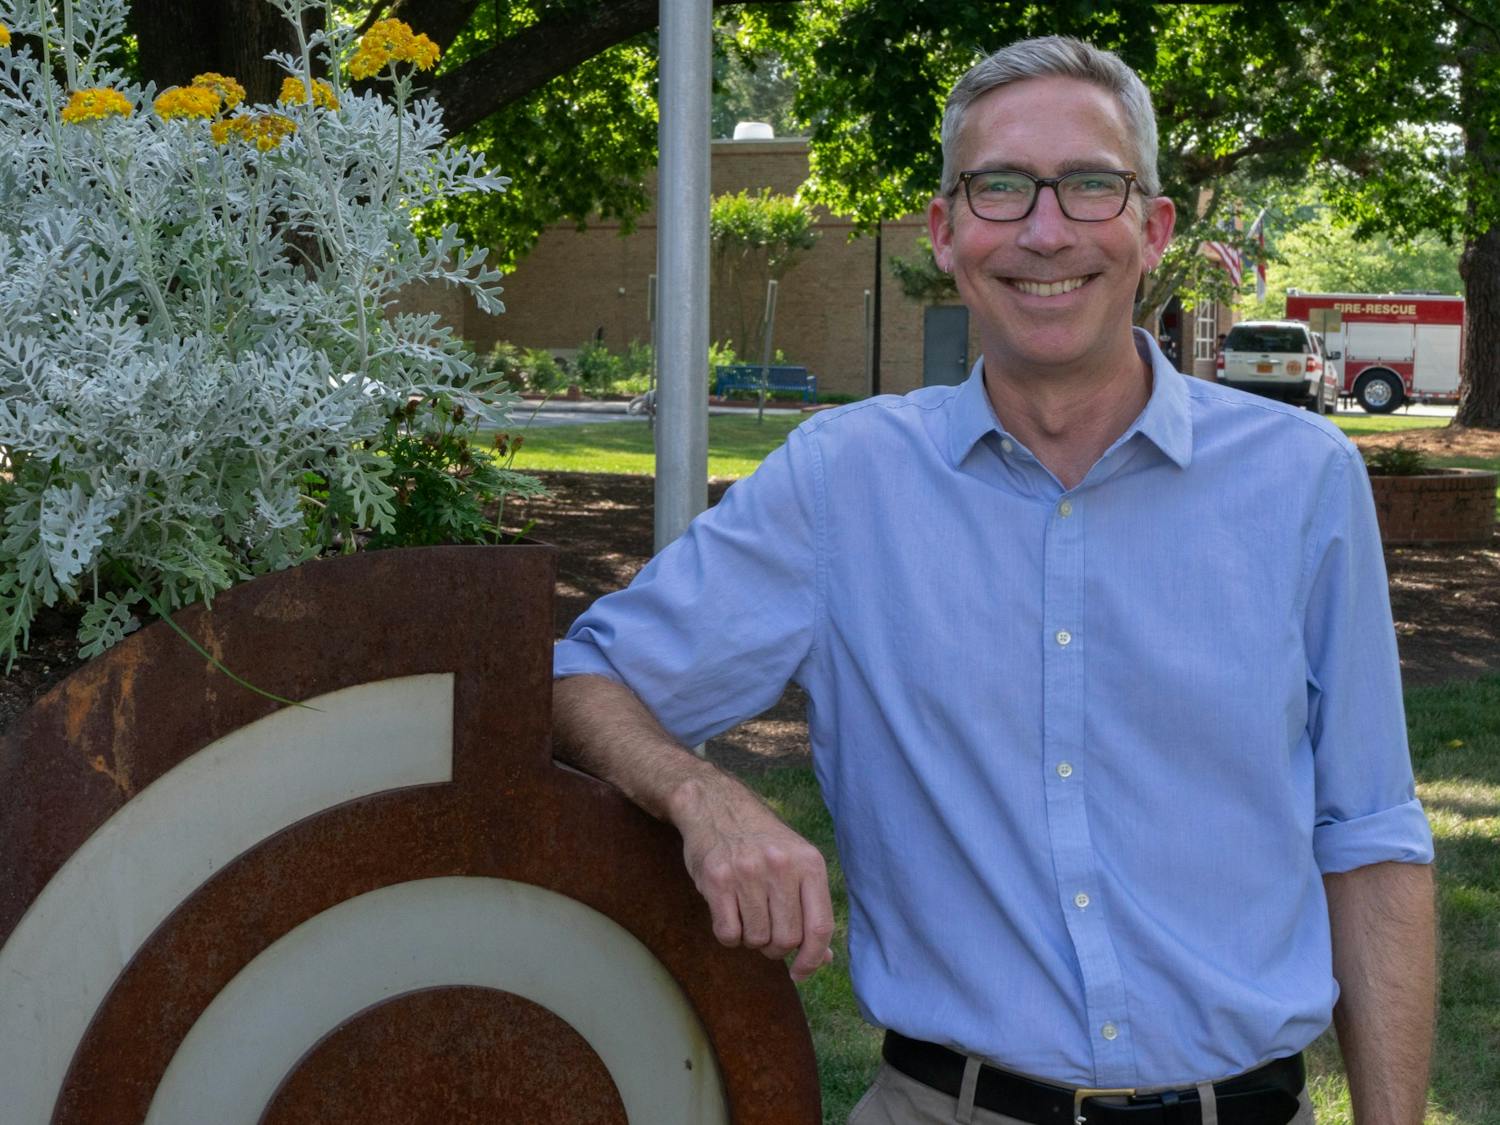 Damon Seils, Carrboro council member, poses beside the Carrboro Town Hall sign on Tuesday, June 8, 2021.